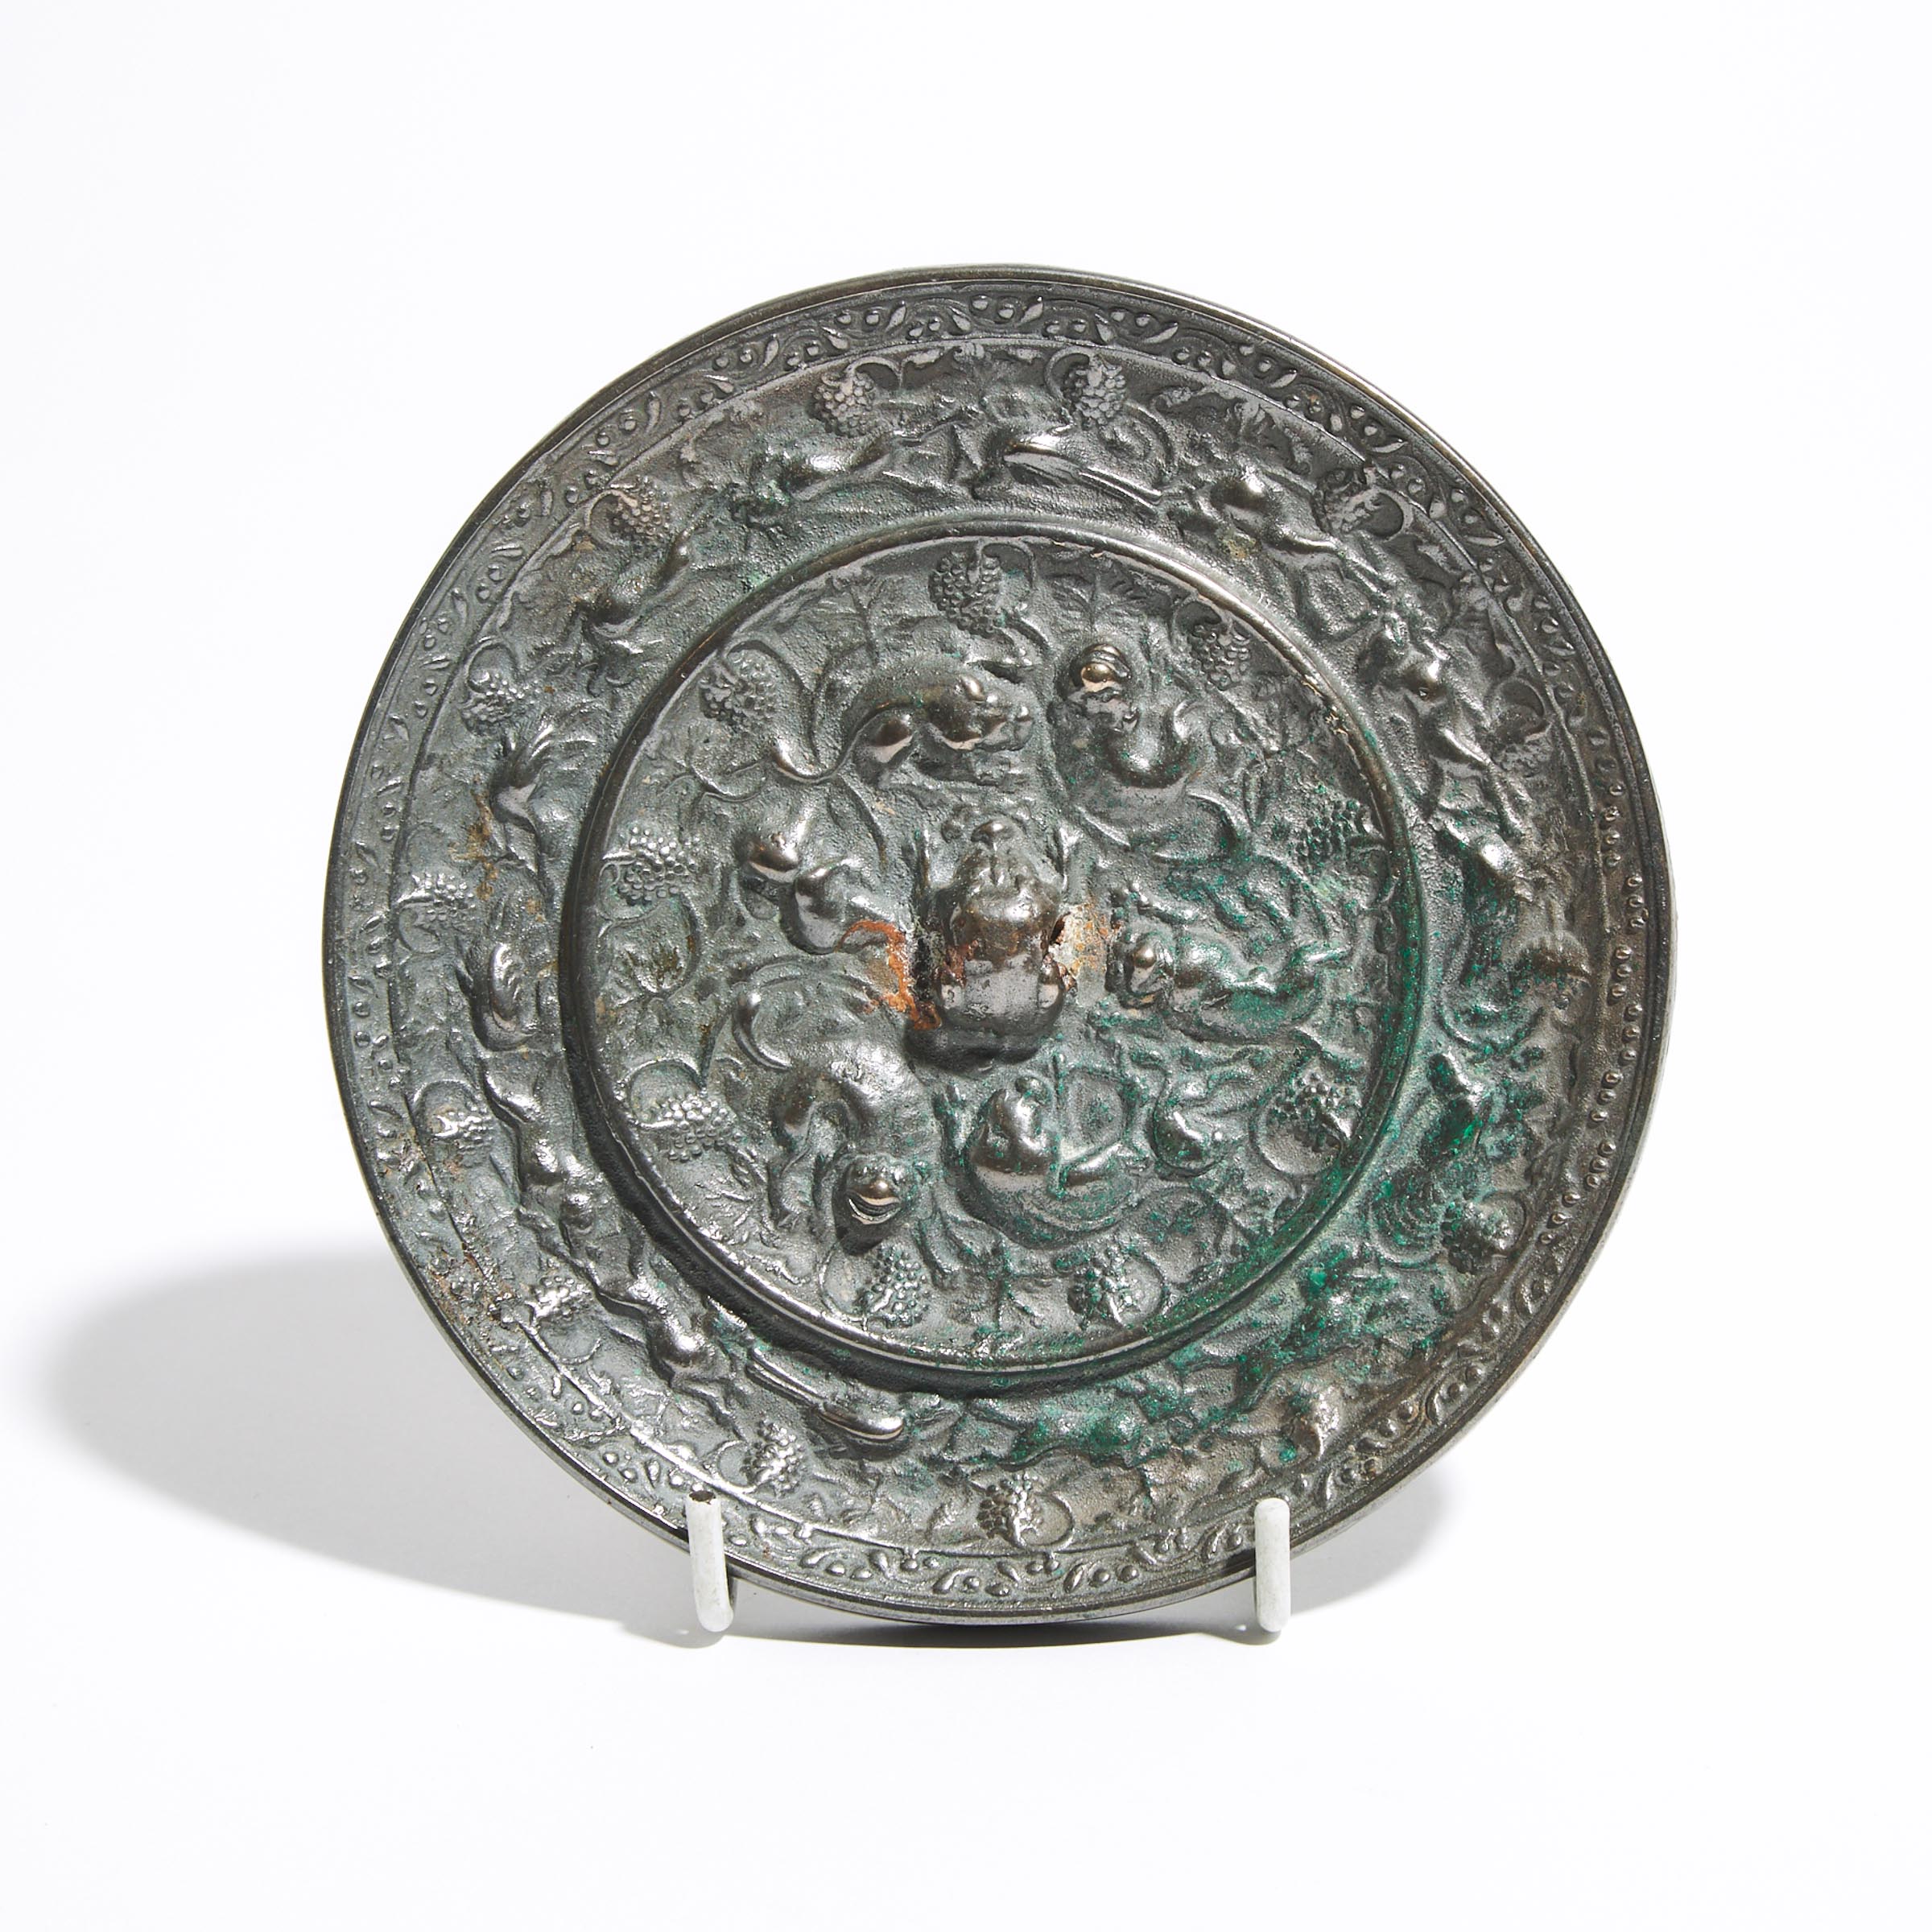 A Silvery Bronze 'Lion And Grapevine' Mirror, Tang Dynasty (AD 618-907)